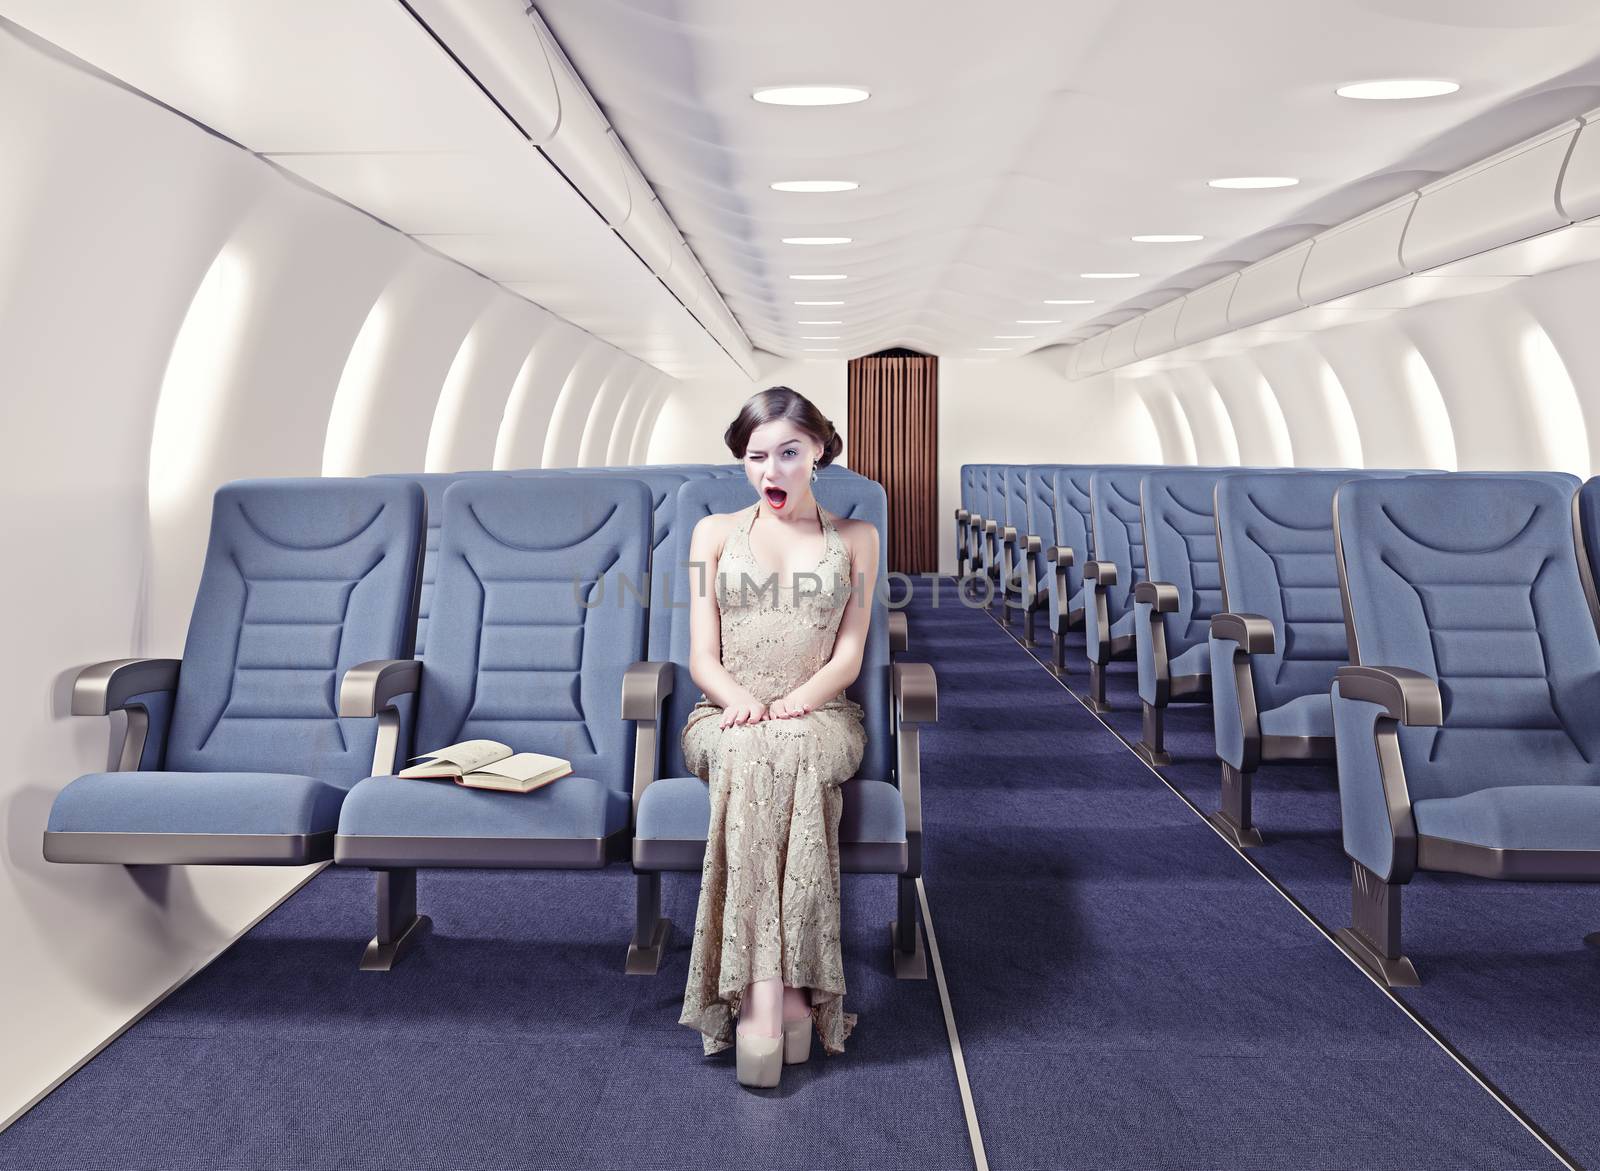 Surprised girl in an airplane. Creative concept